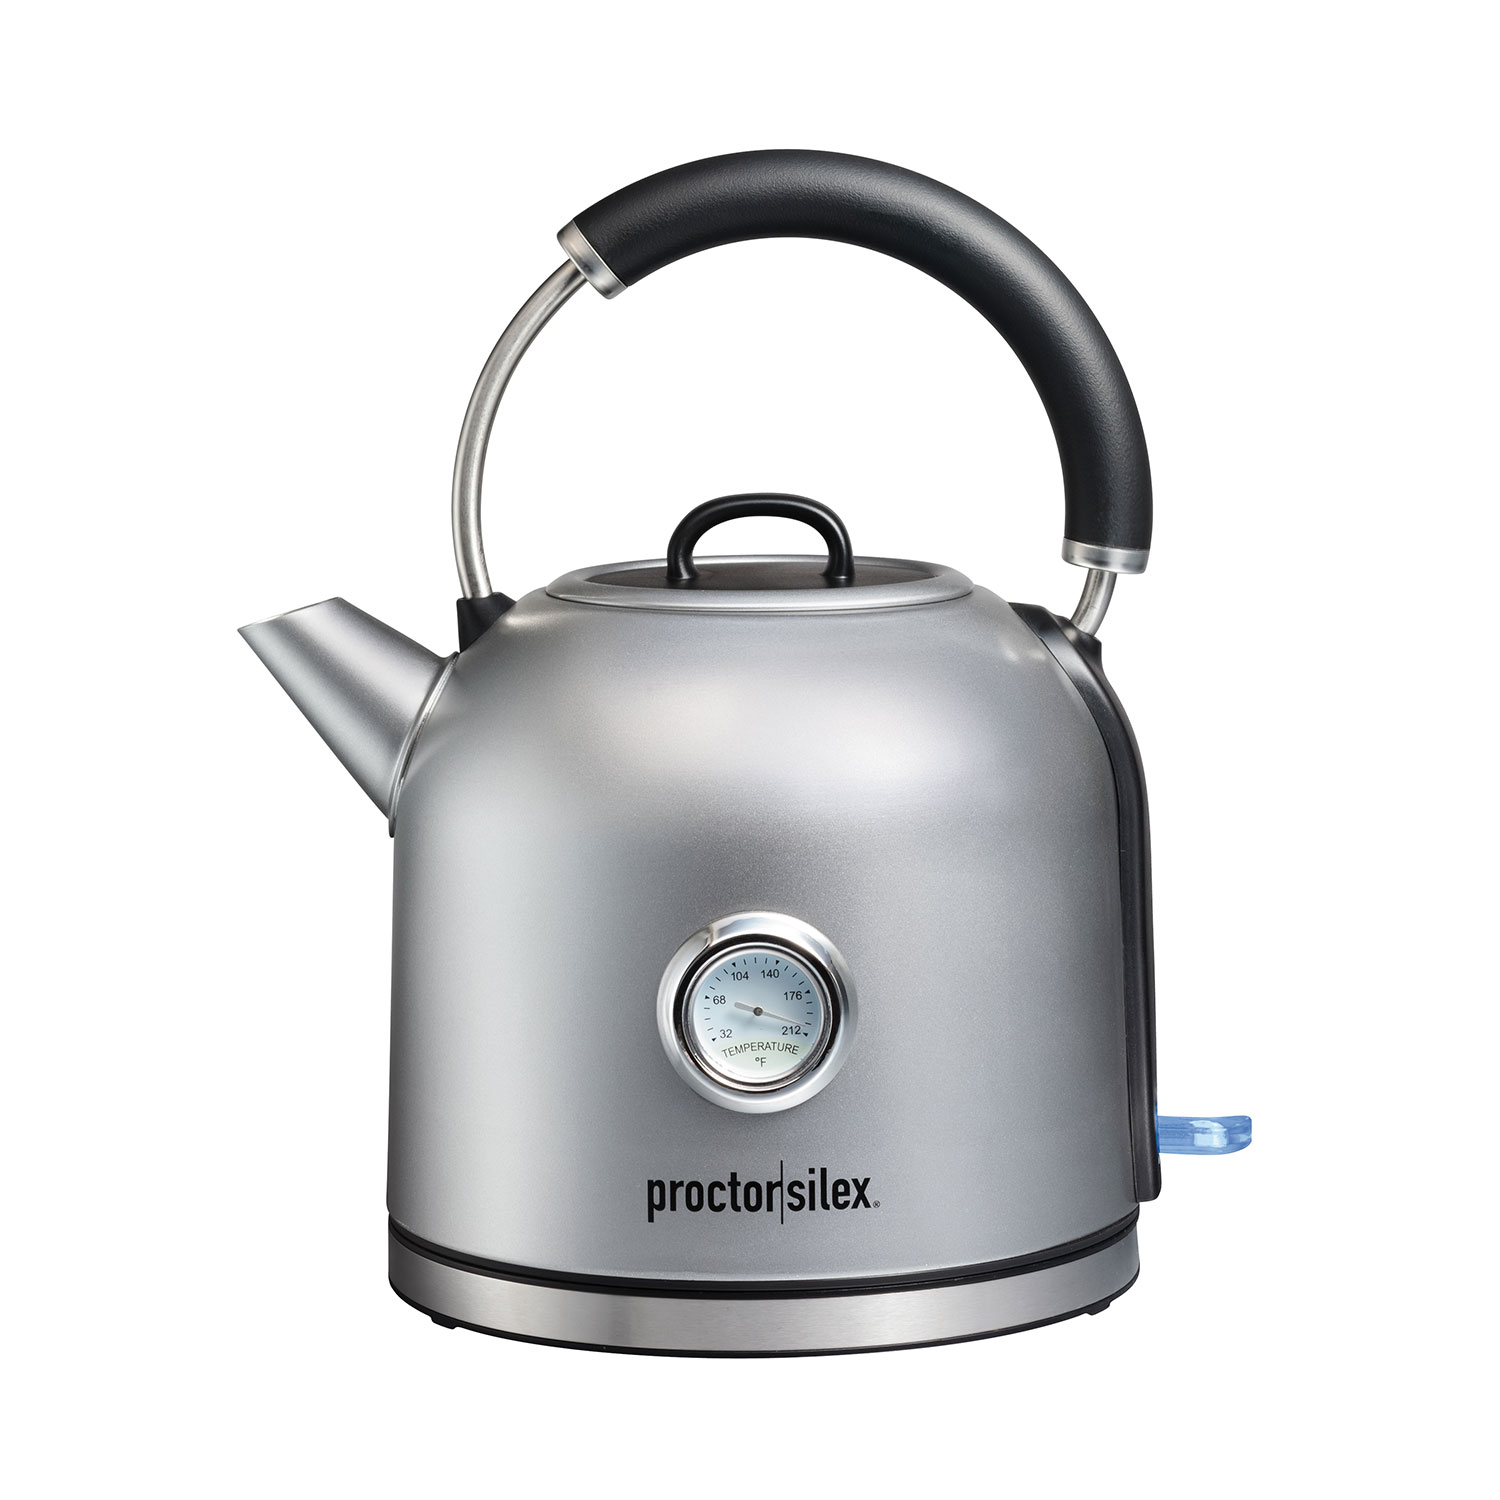 1.7 Liter Electric Dome Kettle - 41035C Small Size